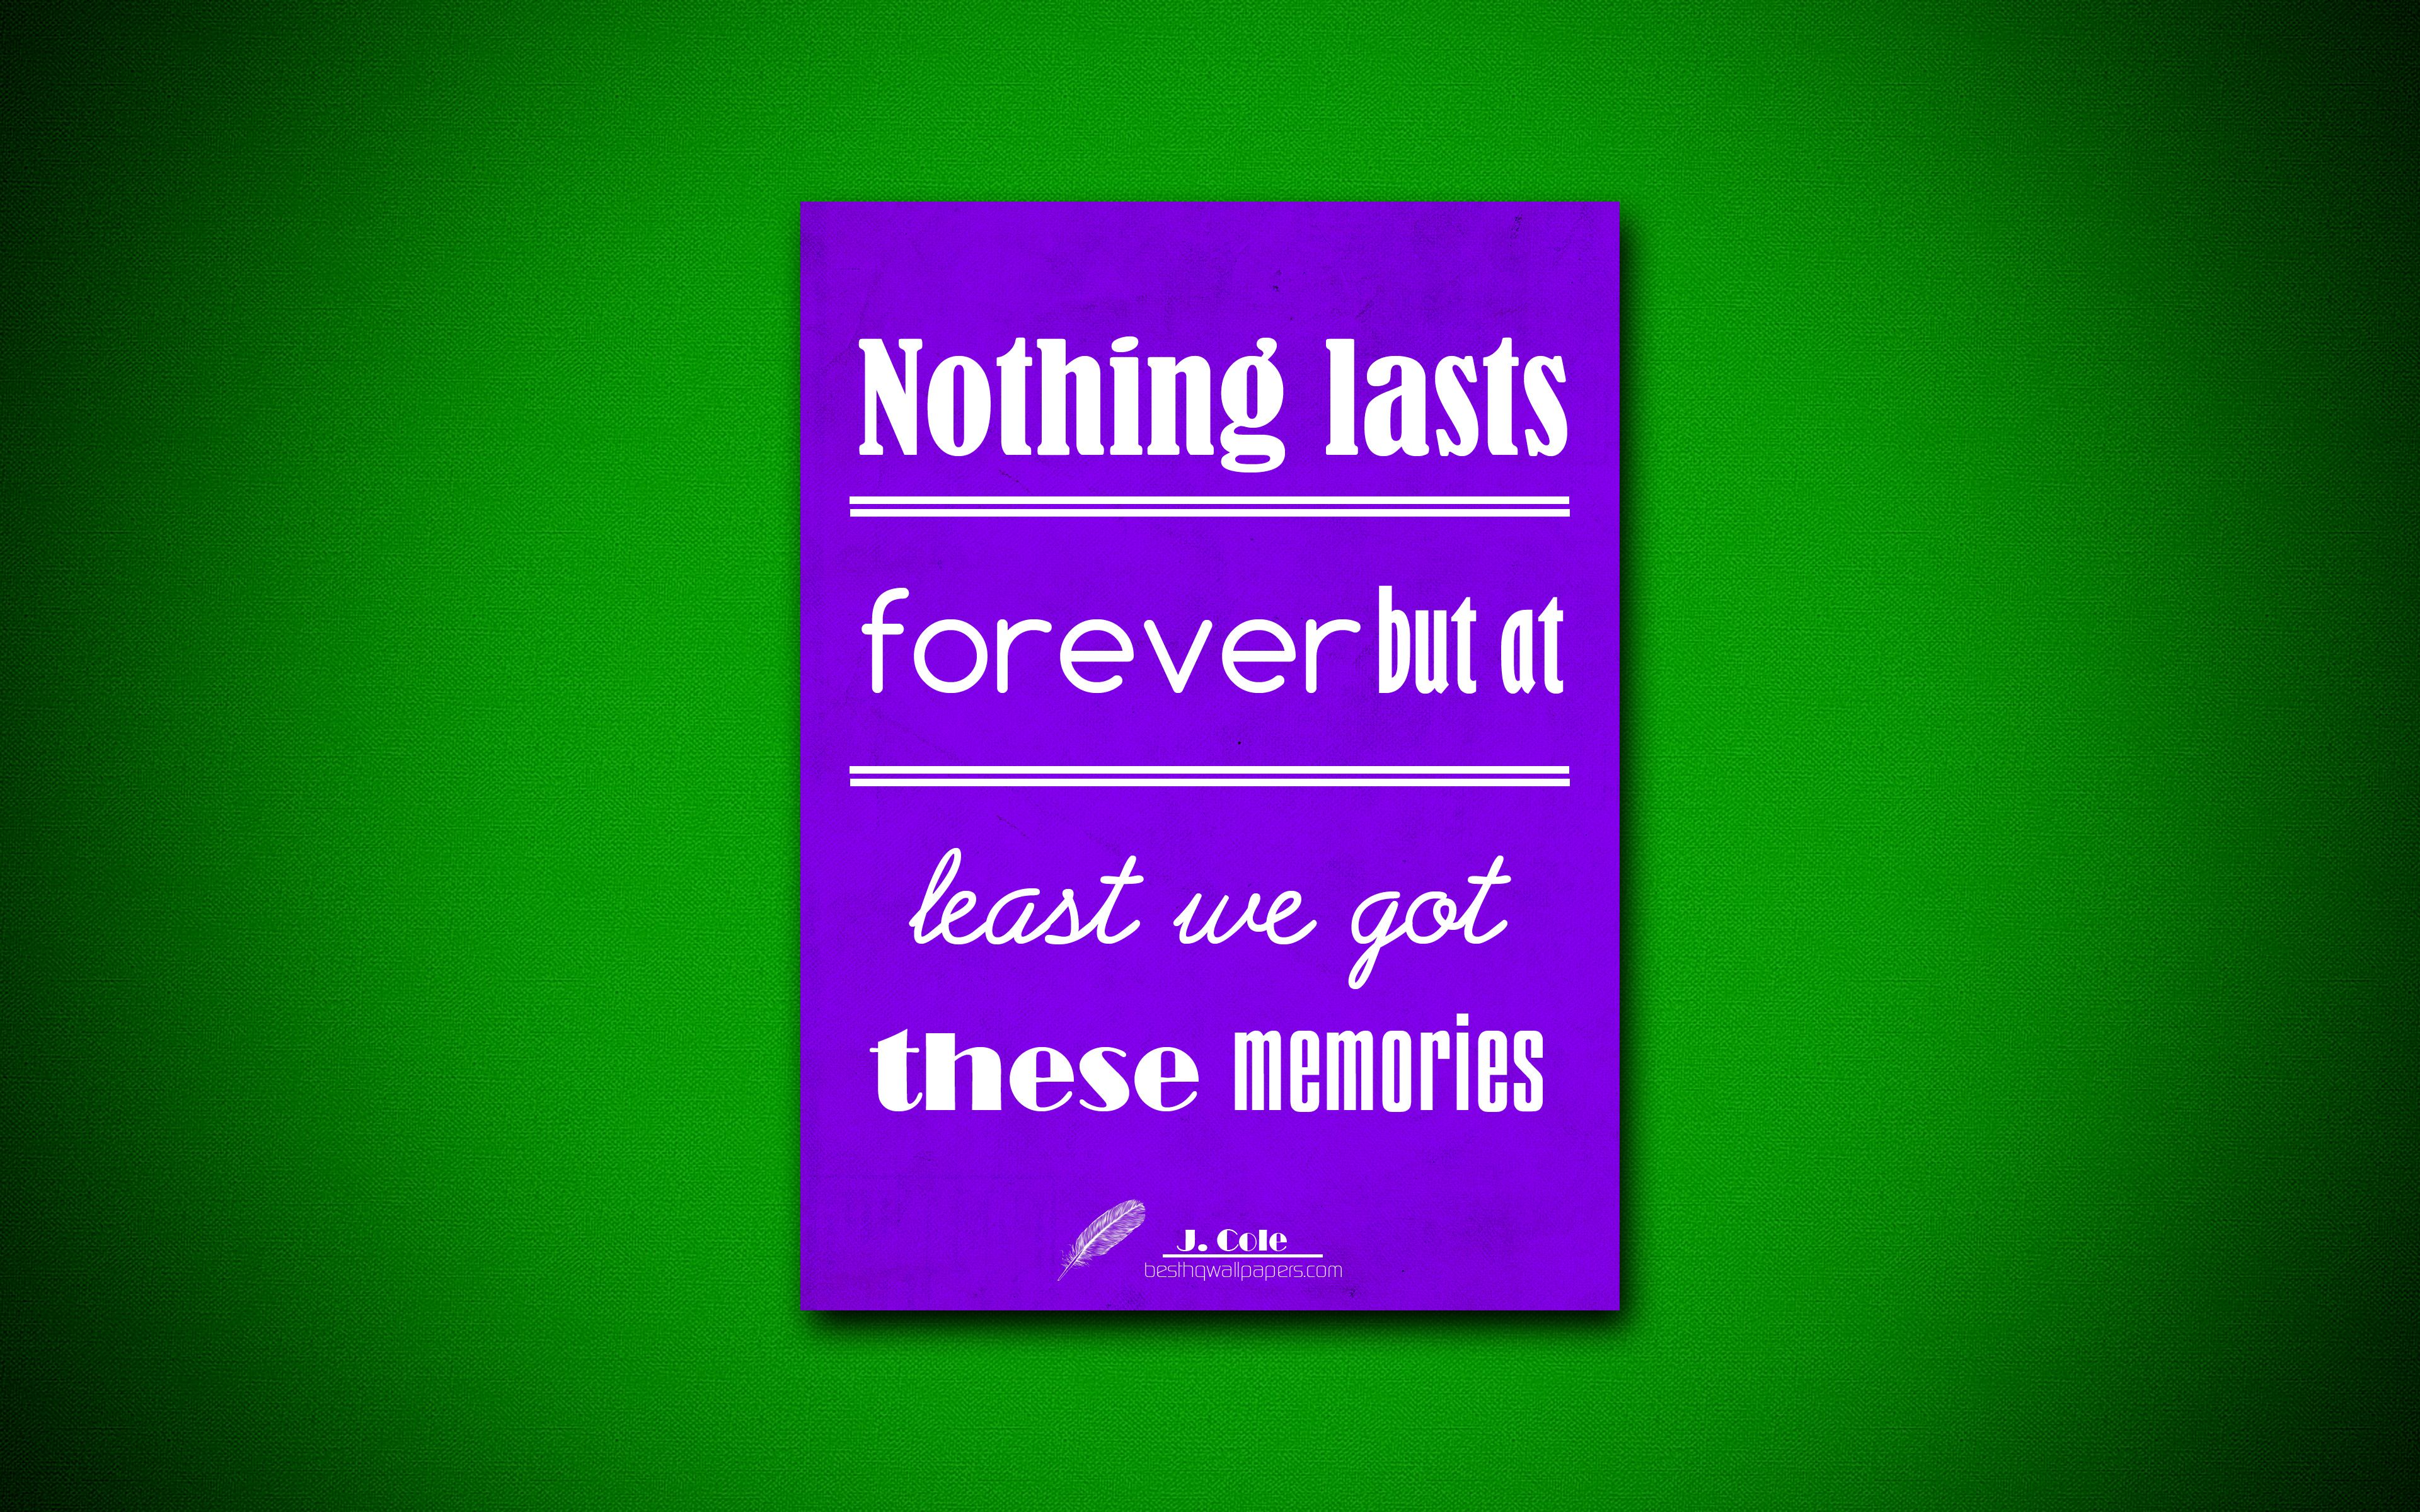 Download wallpaper 4k, Nothing lasts forever but at least we got these memories, quotes about memories, Jermaine Lamar Cole, violet paper, inspiration, Jermaine Lamar Cole quotes for desktop with resolution 3840x2400. High